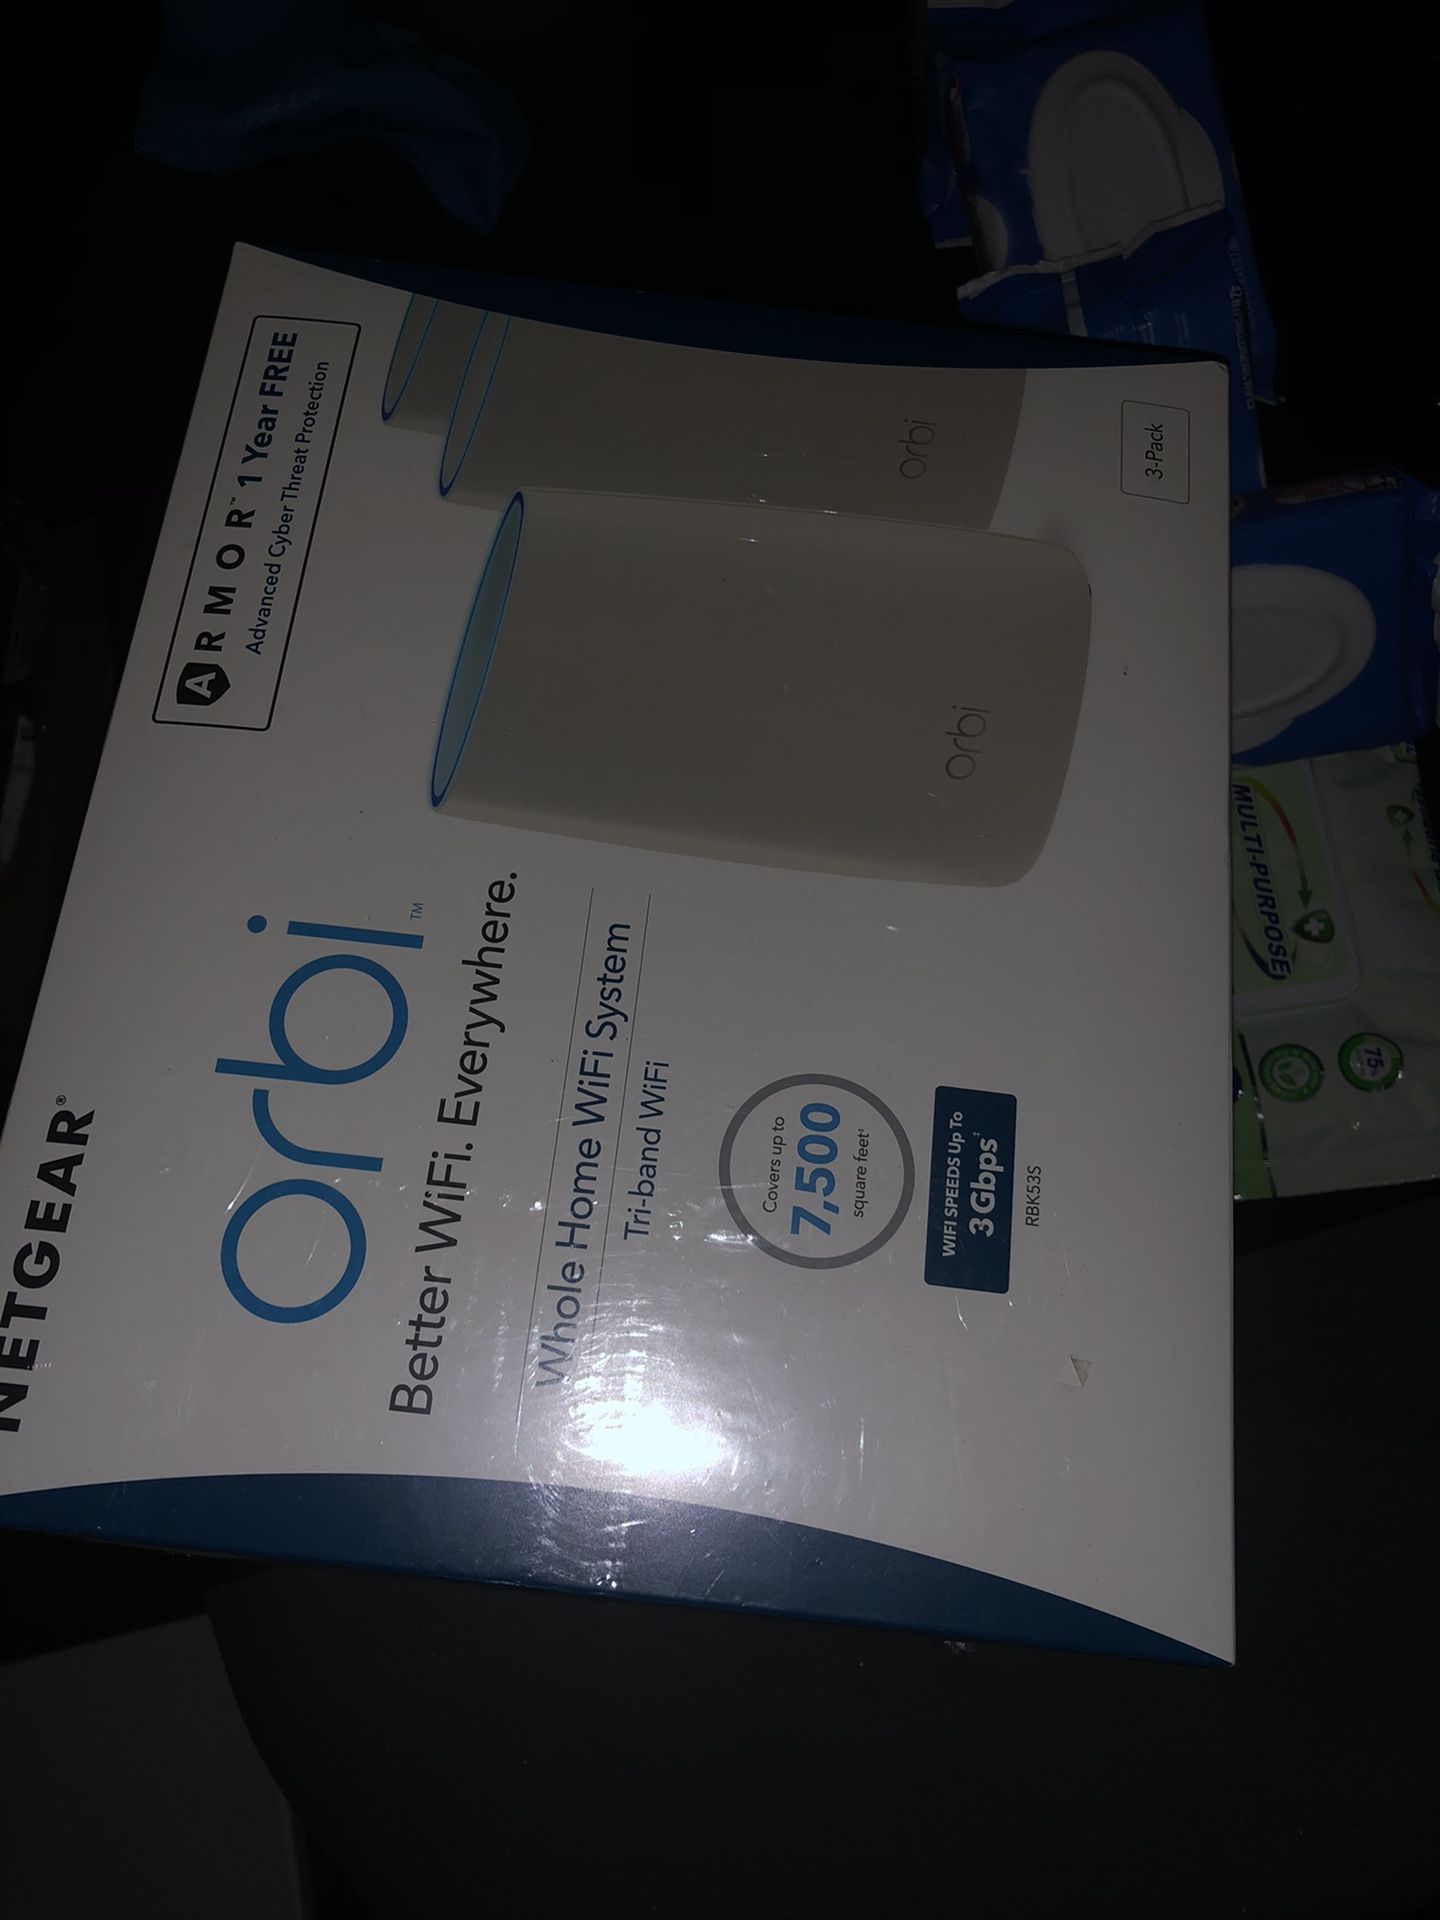 Orbi whole home wifi system